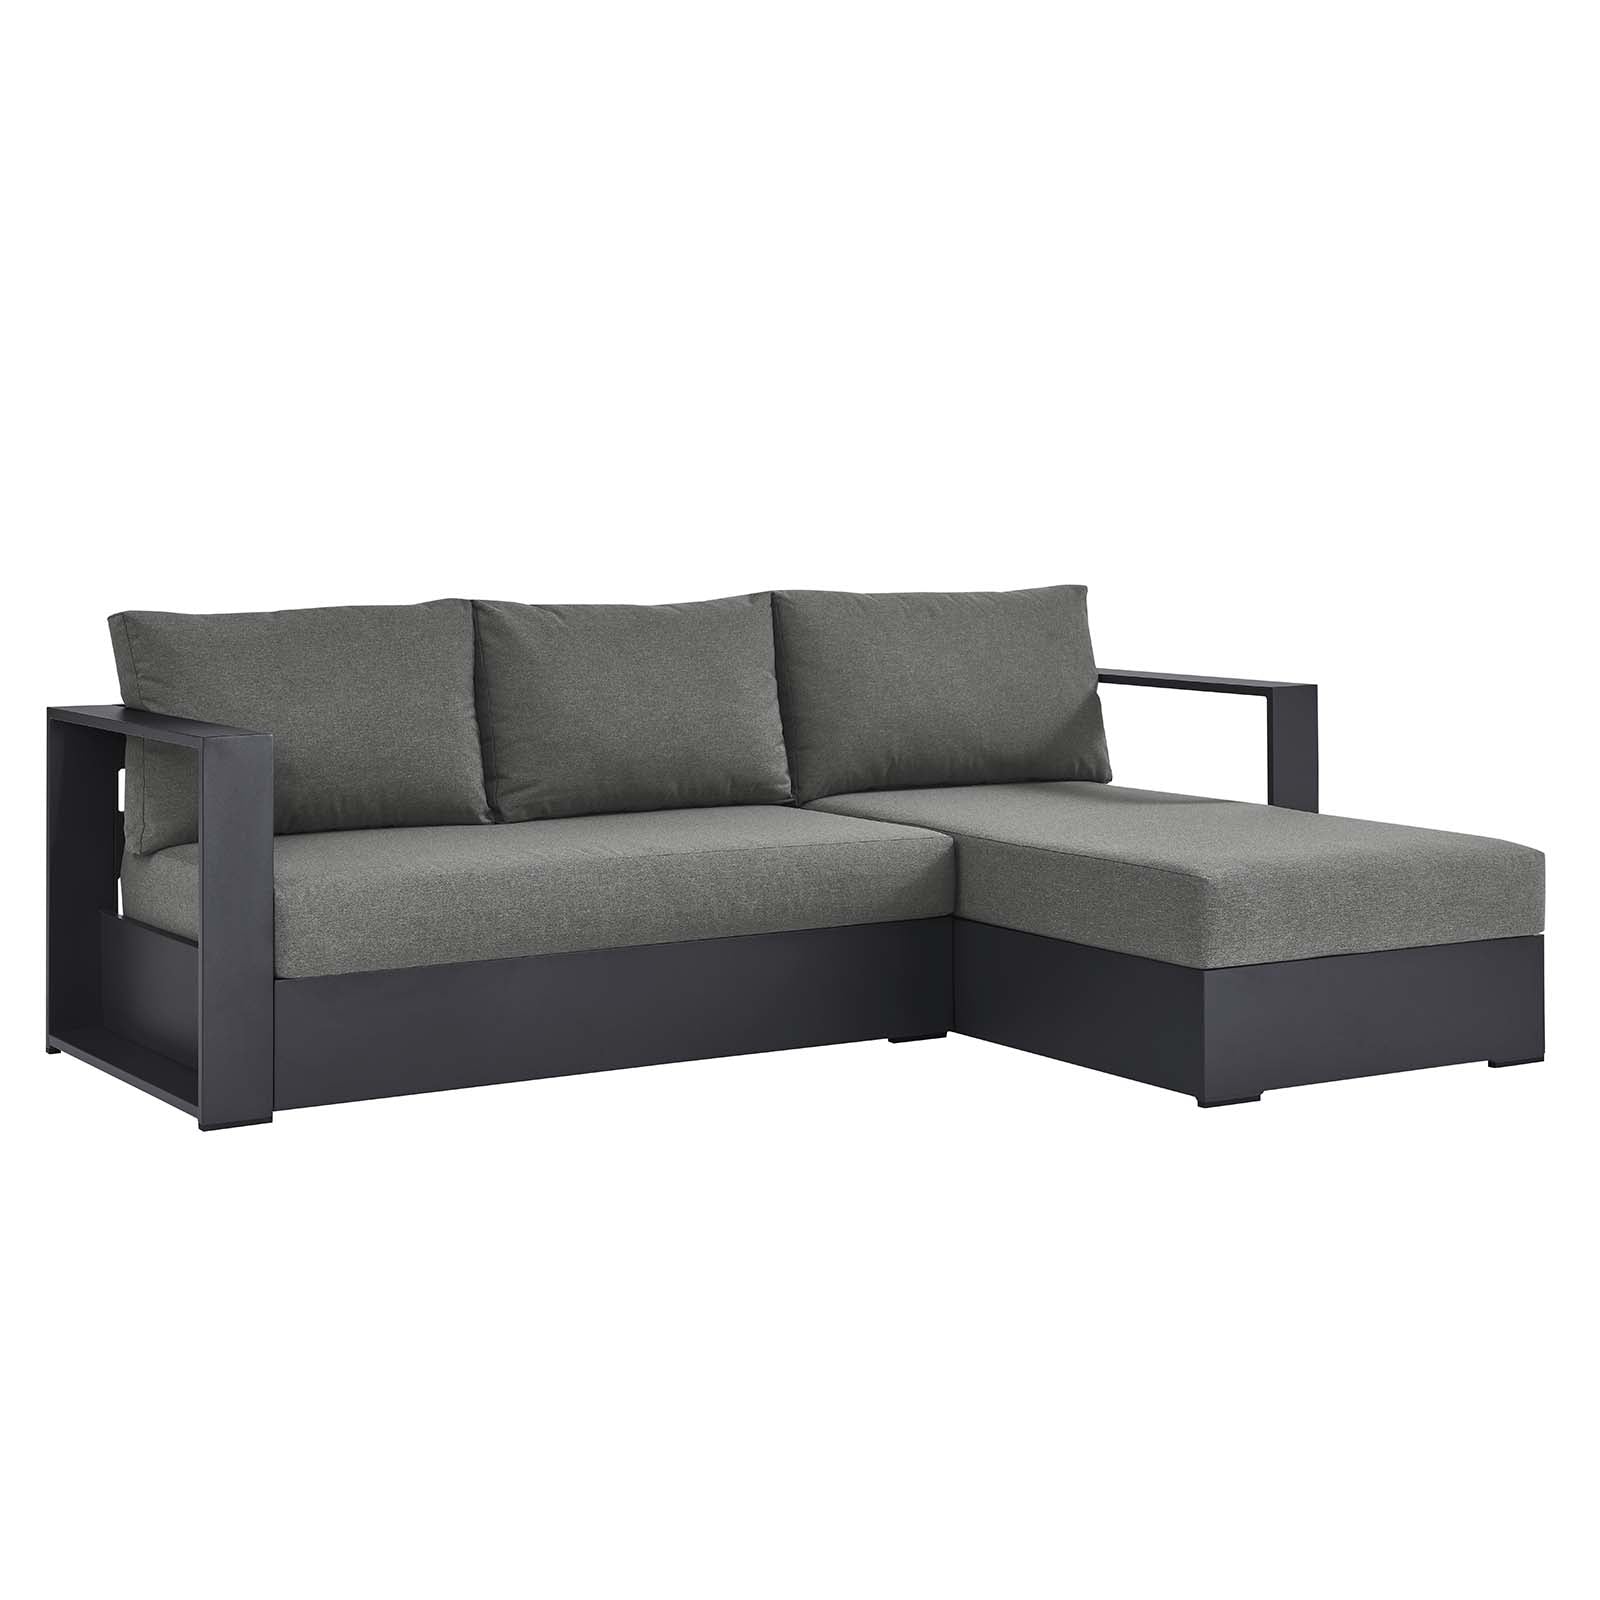 Tahoe Outdoor Patio Powder-Coated Aluminum 2-Piece Right-Facing Chaise Sectional Sofa Set